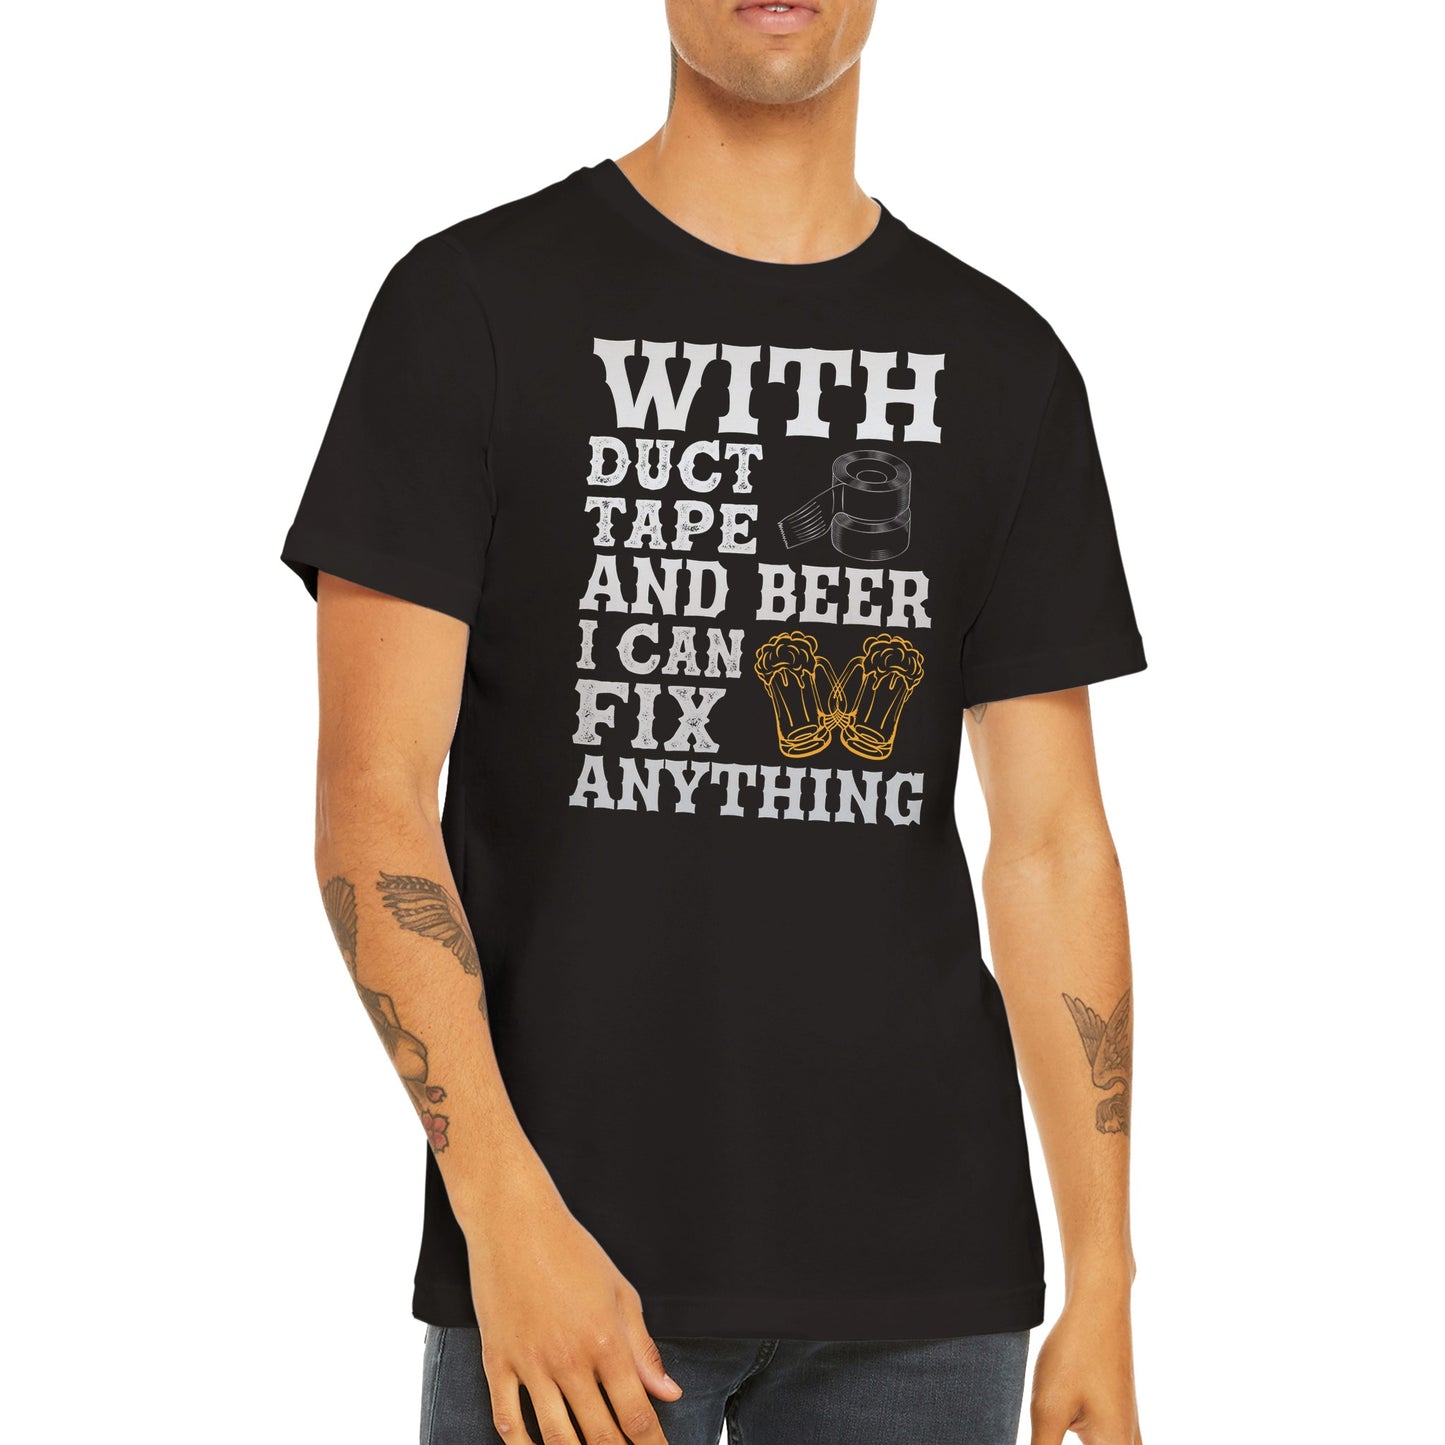 Funny T-shirts - With Duct Tape And Beet I Can Fix Anything - Premium Unisex T-shirt 